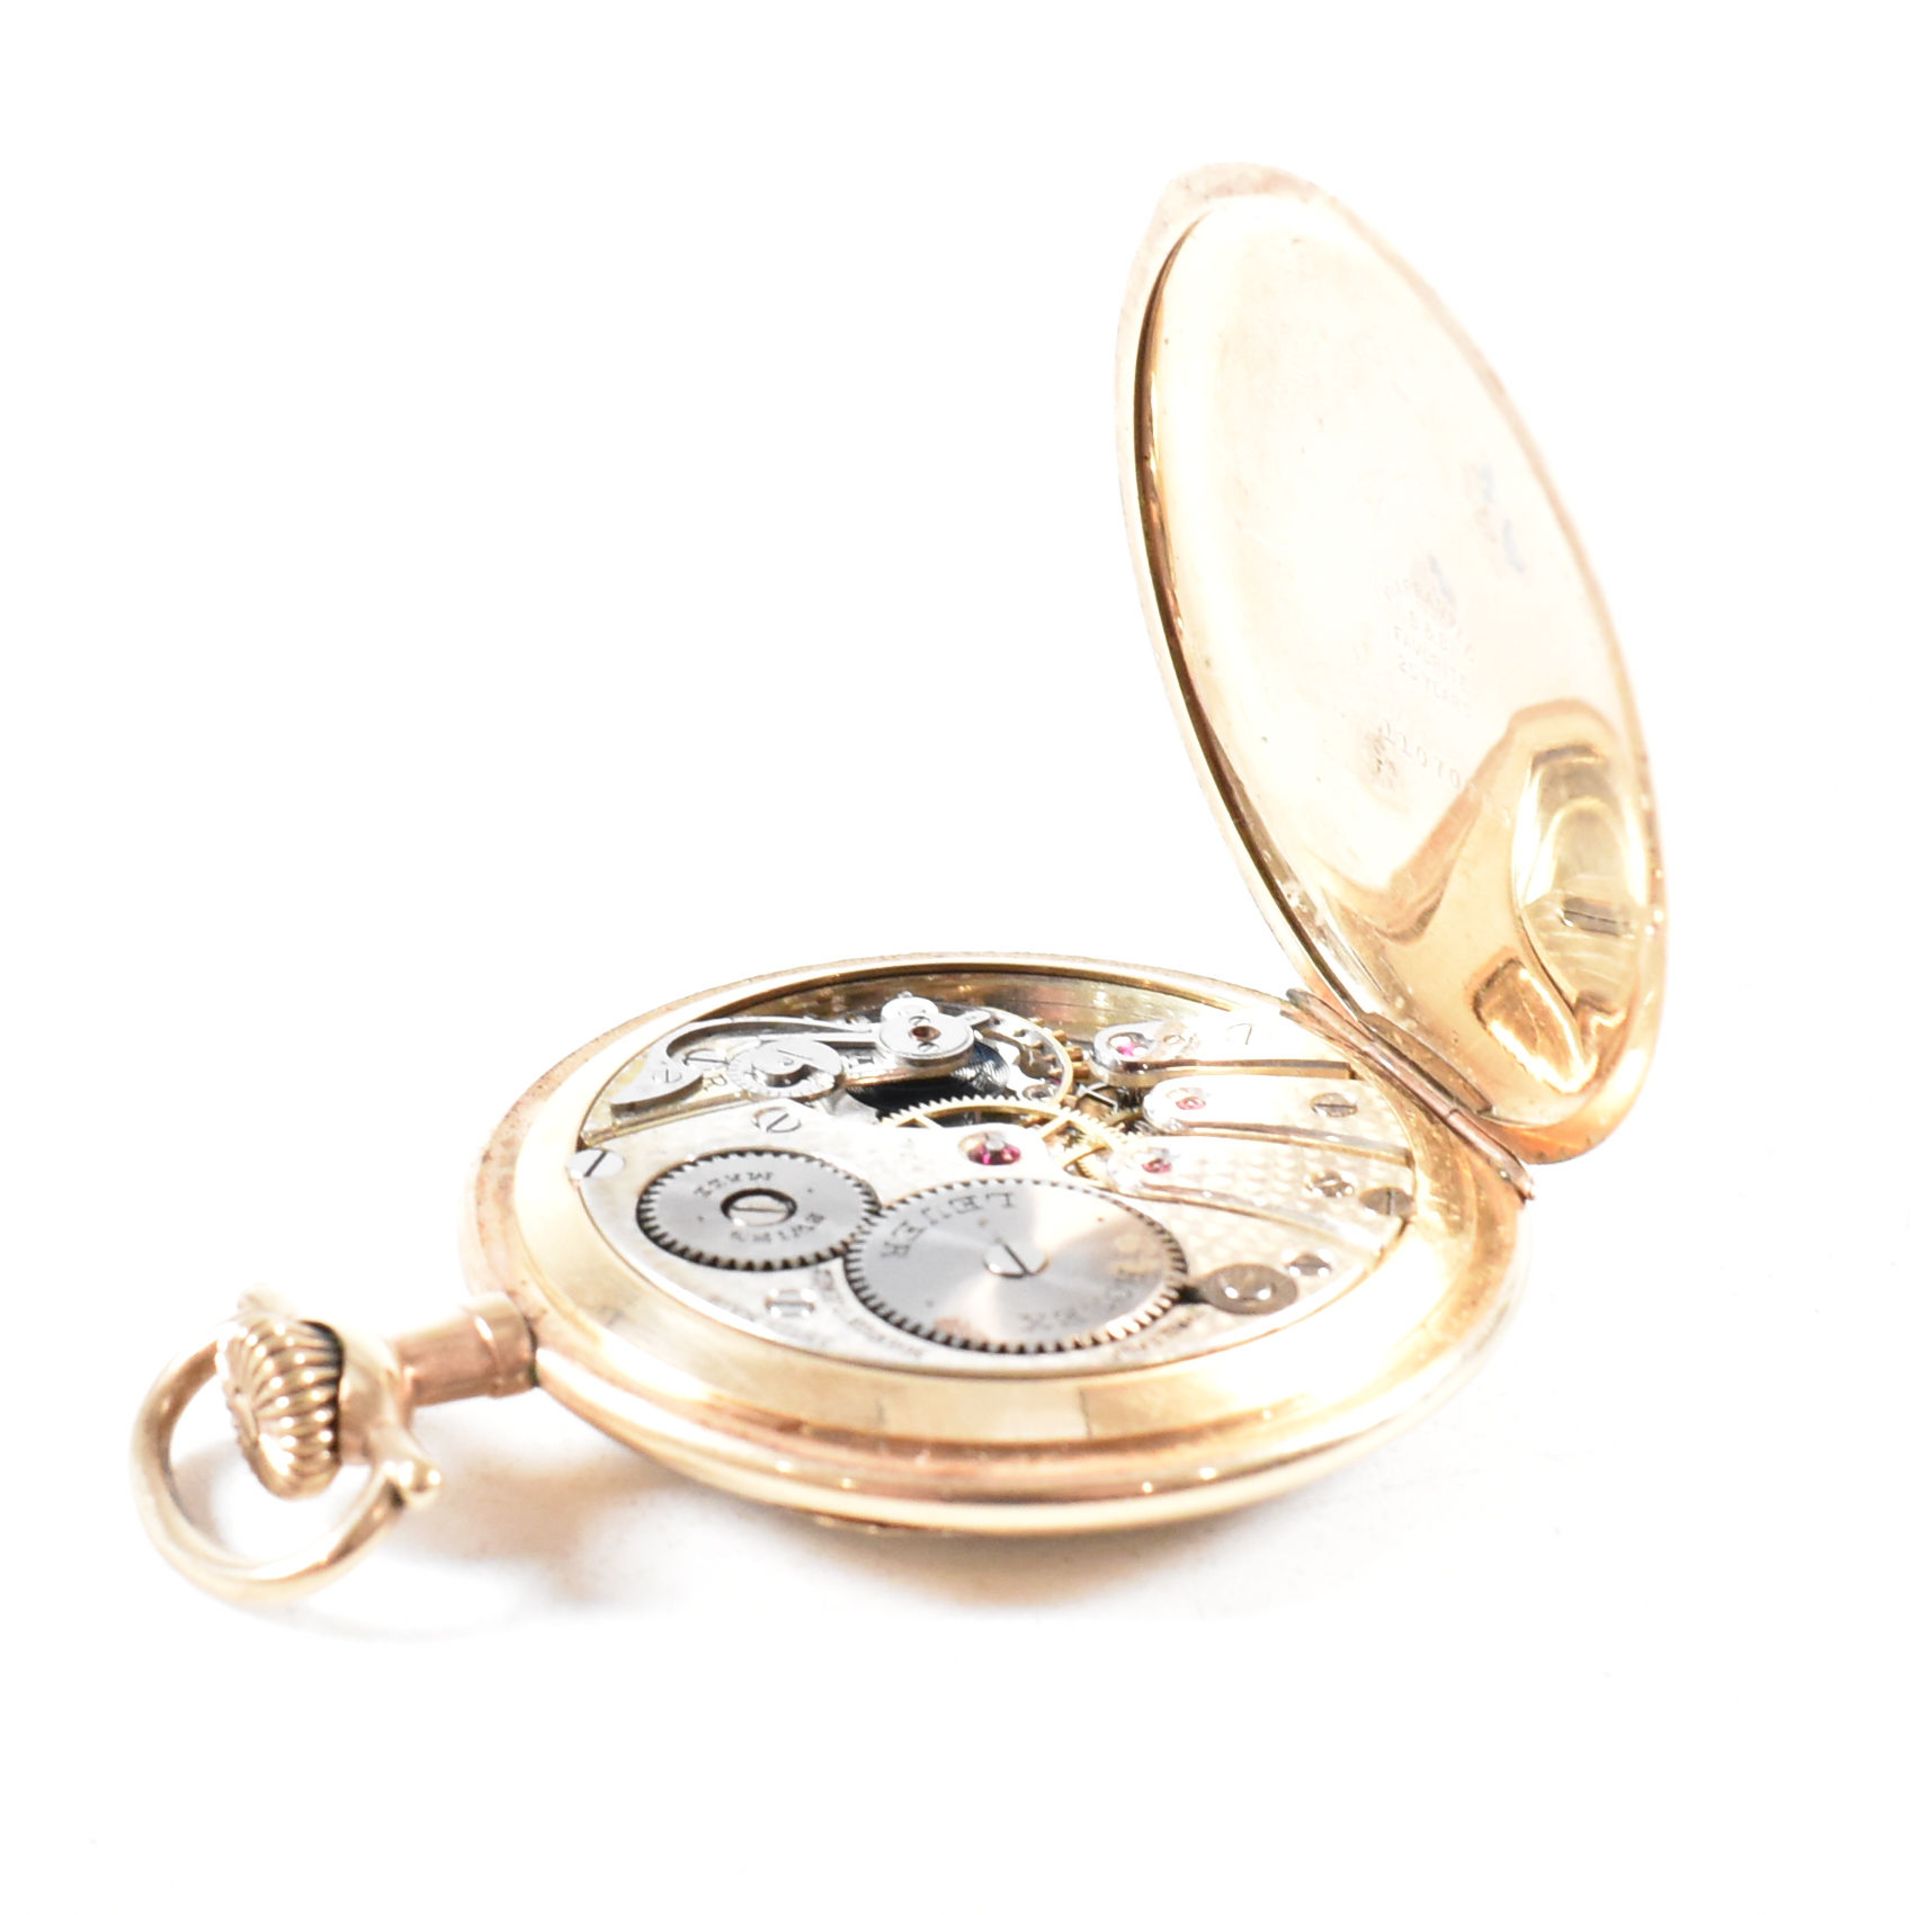 ROLEX LEVER SWISS MADE YELLOW METAL POCKET WATCH - Image 7 of 7